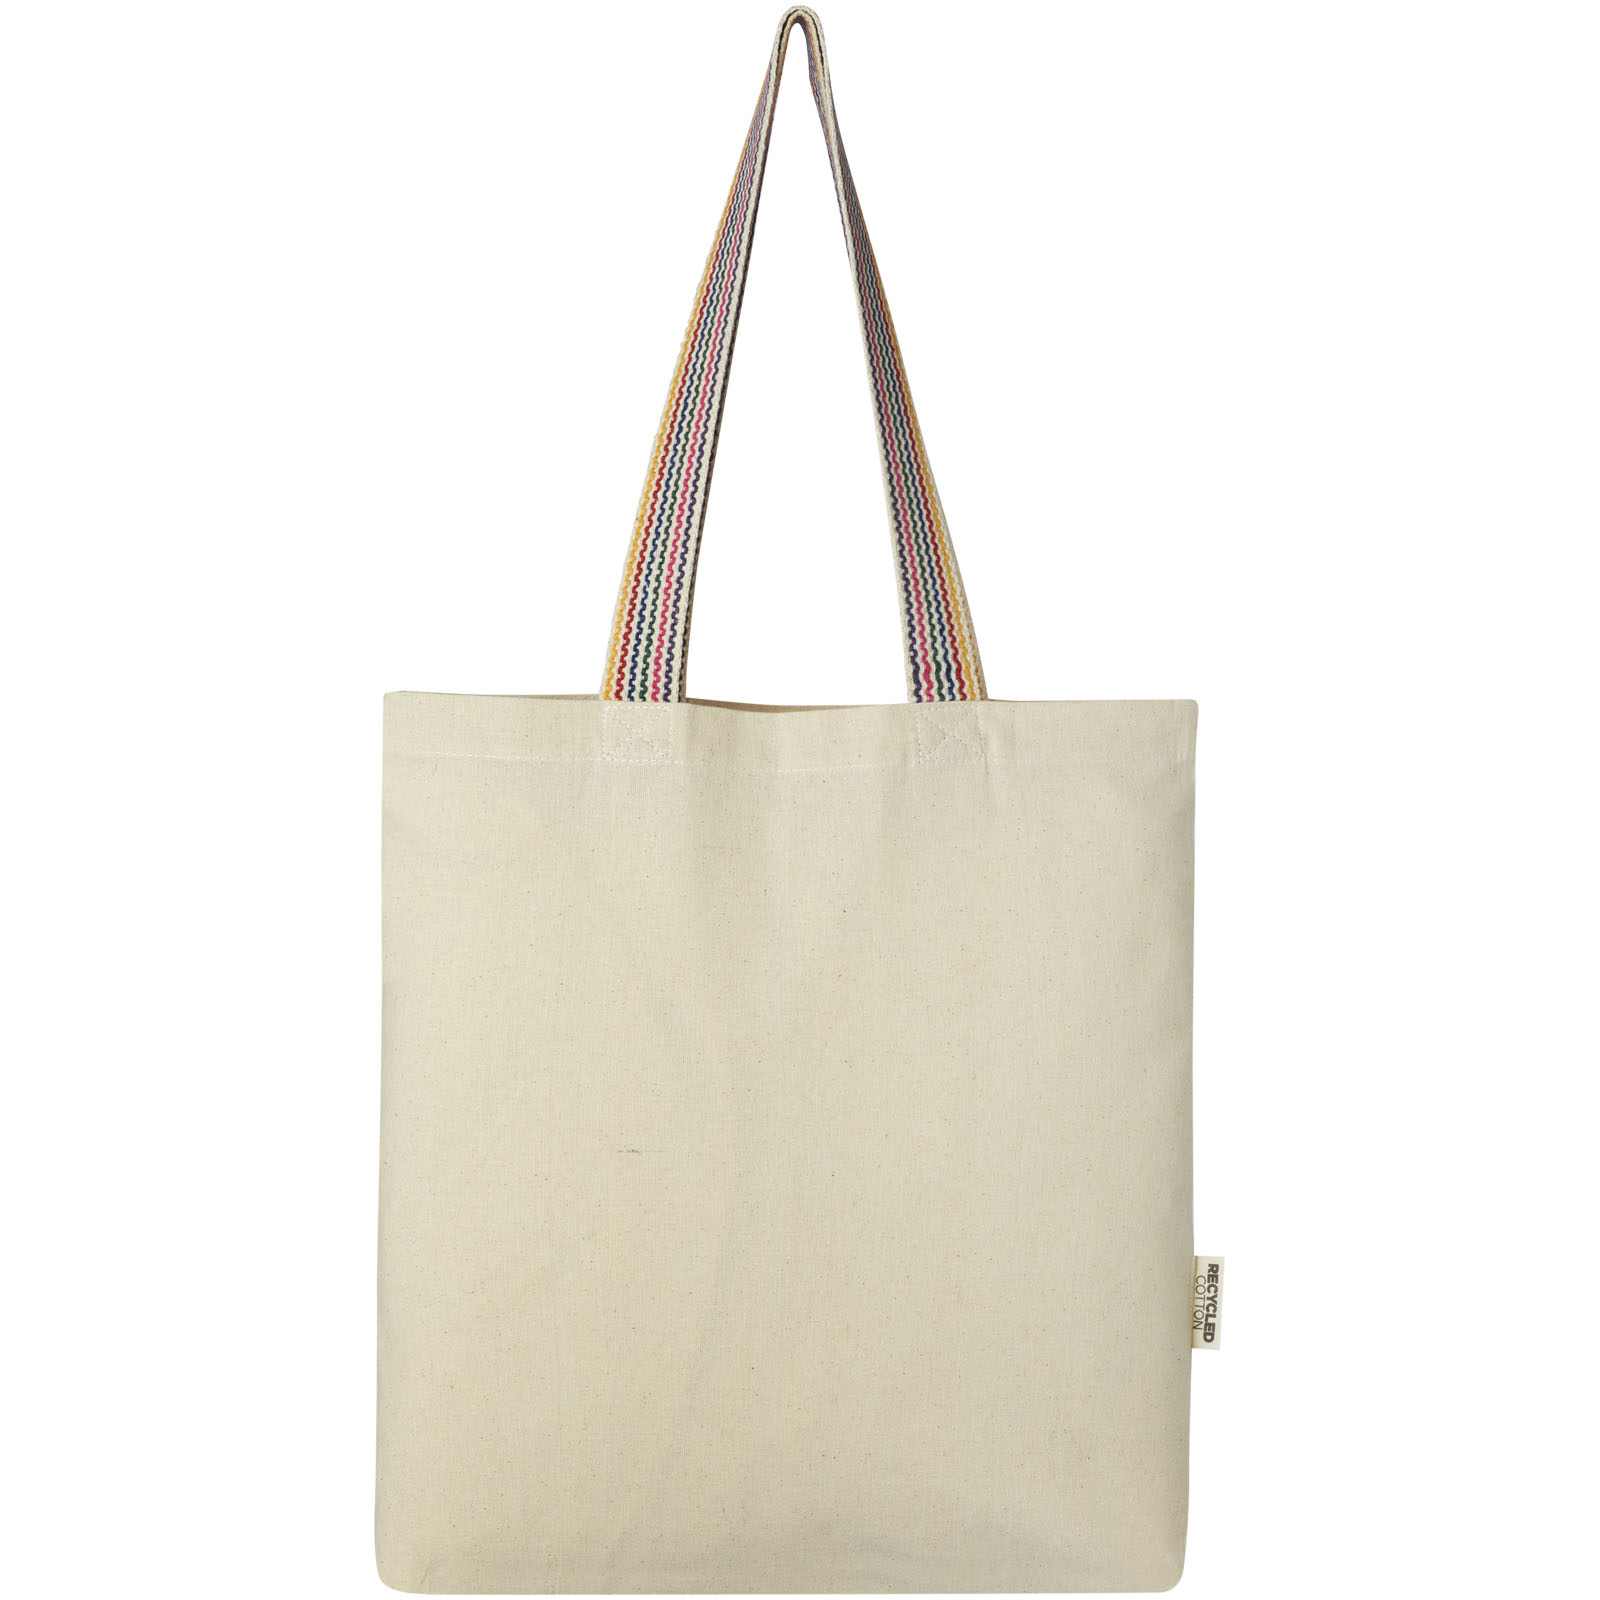 Advertising Shopping & Tote Bags - Rainbow 180 g/m² recycled cotton tote bag 5L - 1